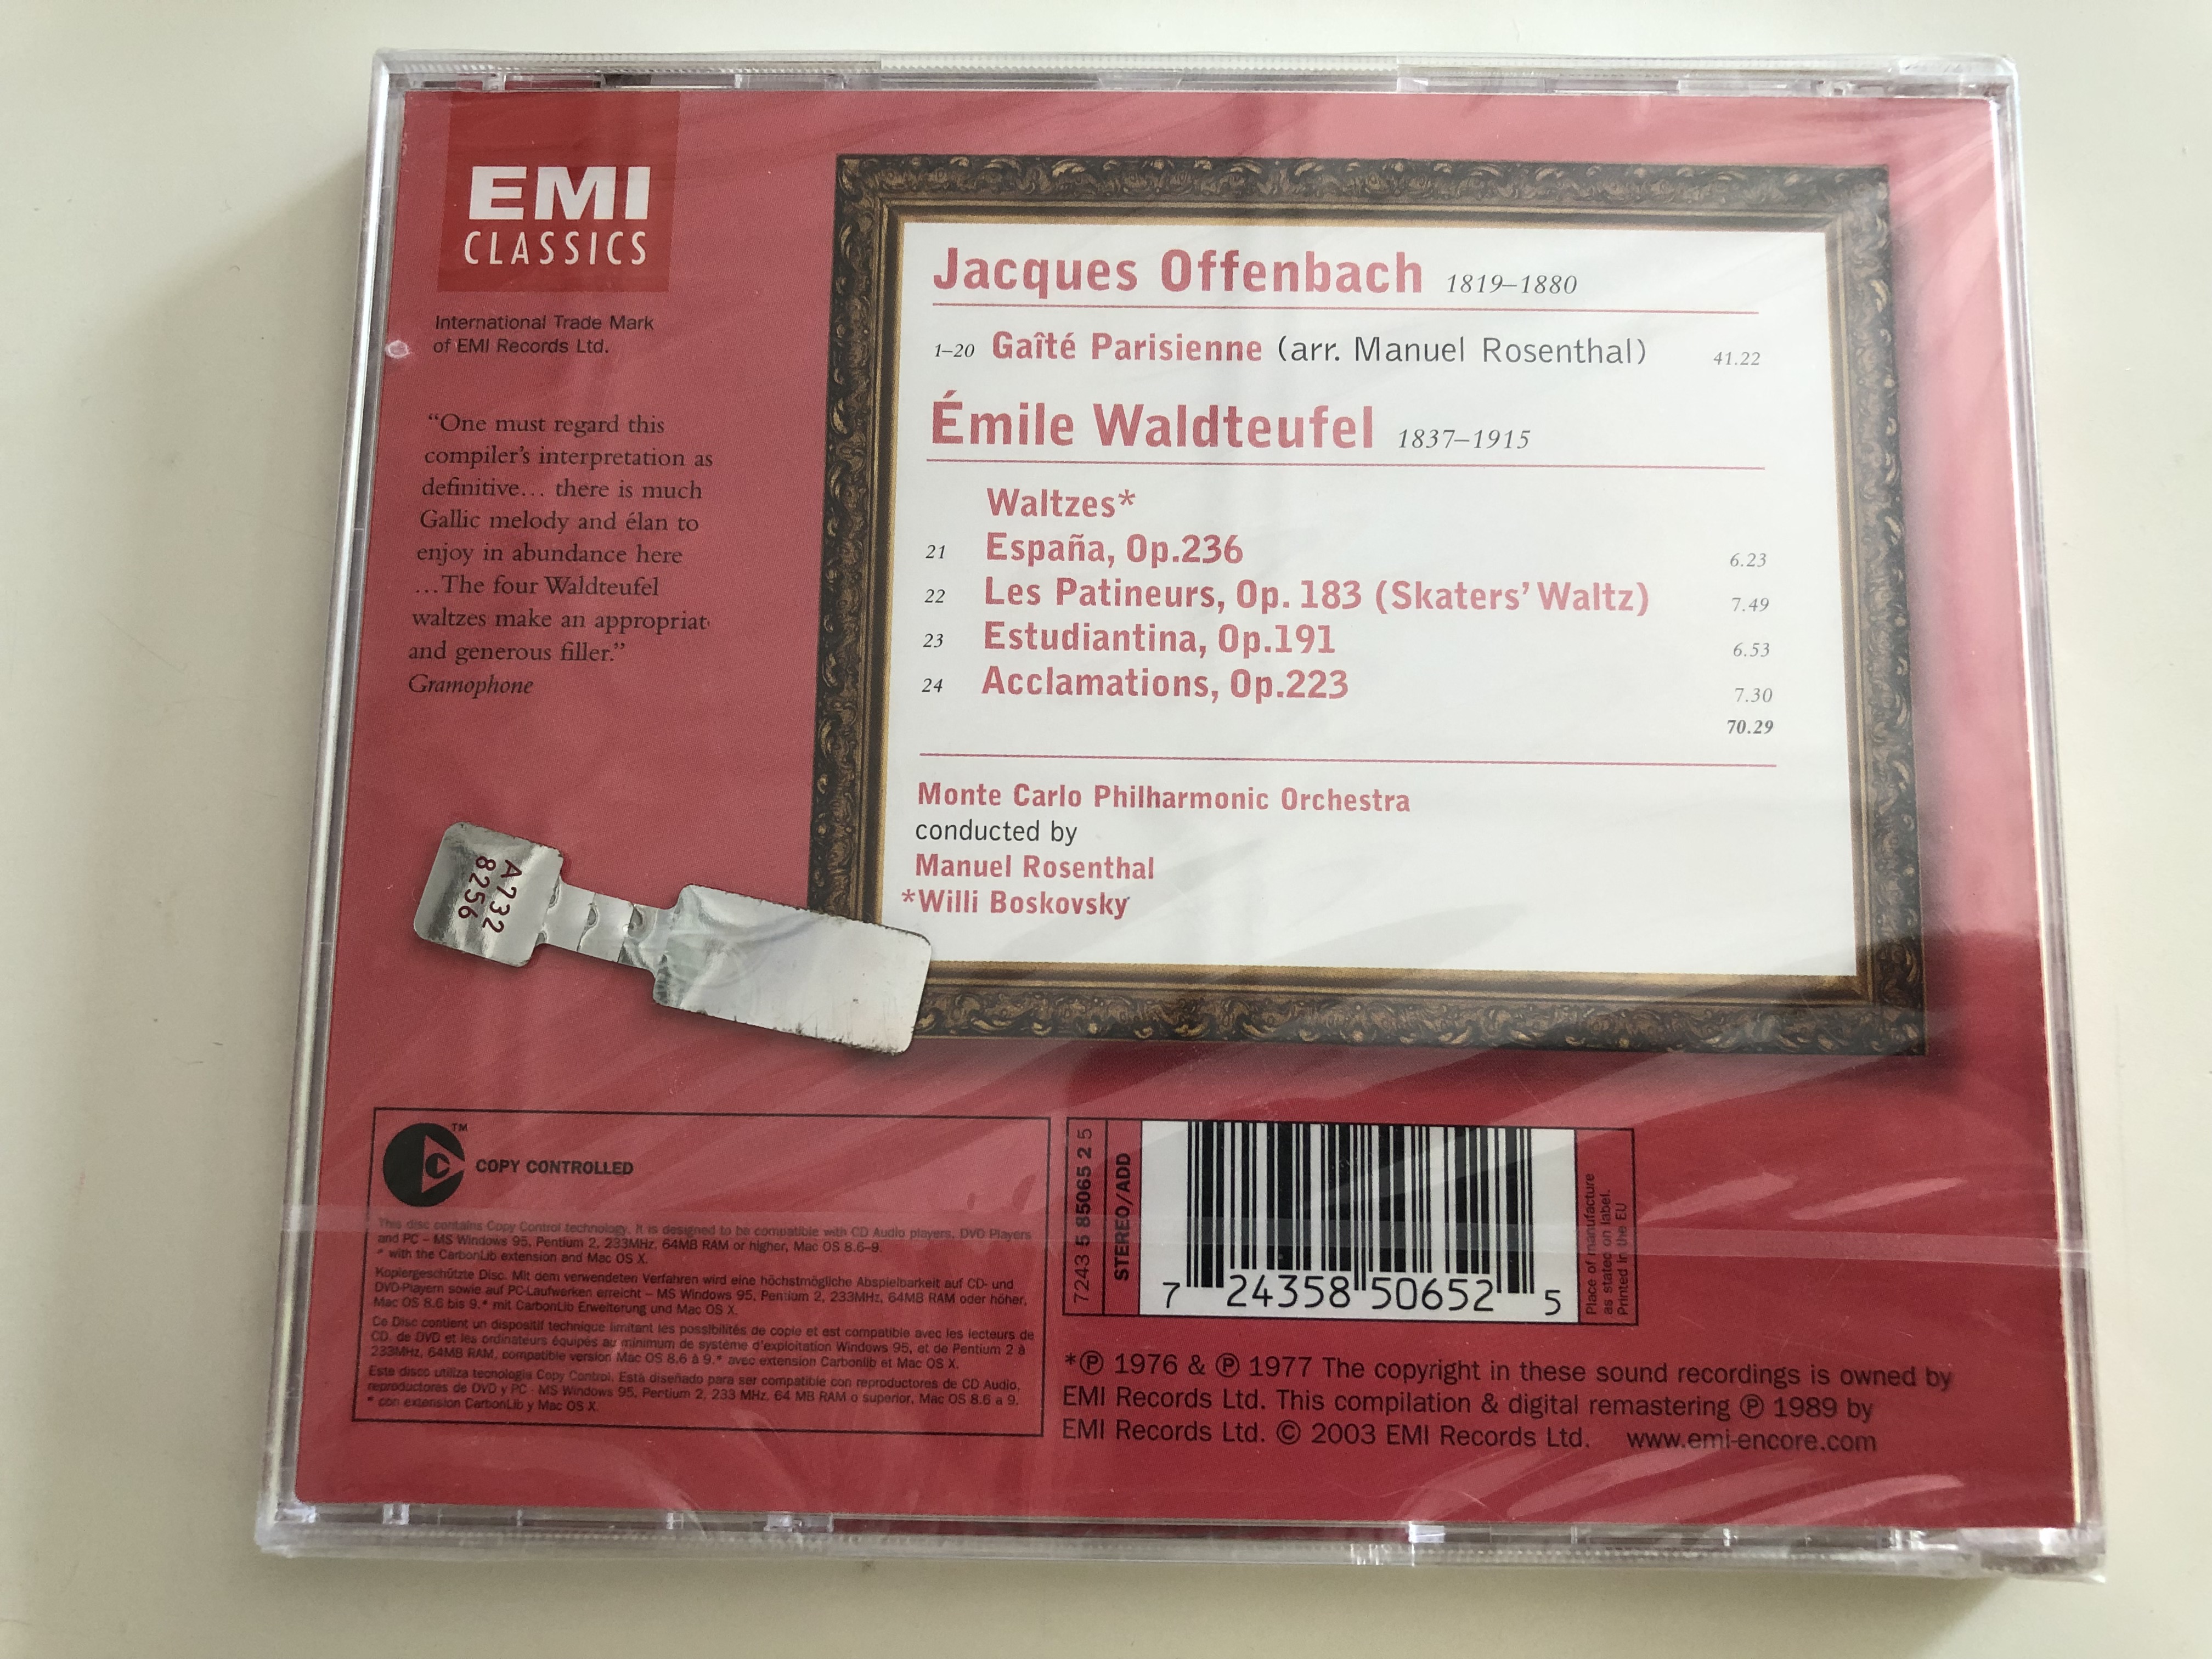 offenbach-gait-parisienne-waldteufel-waltzes-monte-carlo-philharmonic-orchestra-conducted-by-manuel-rosenthal-willi-boskovsky-emi-classic-audio-cd-2003-2-.jpg